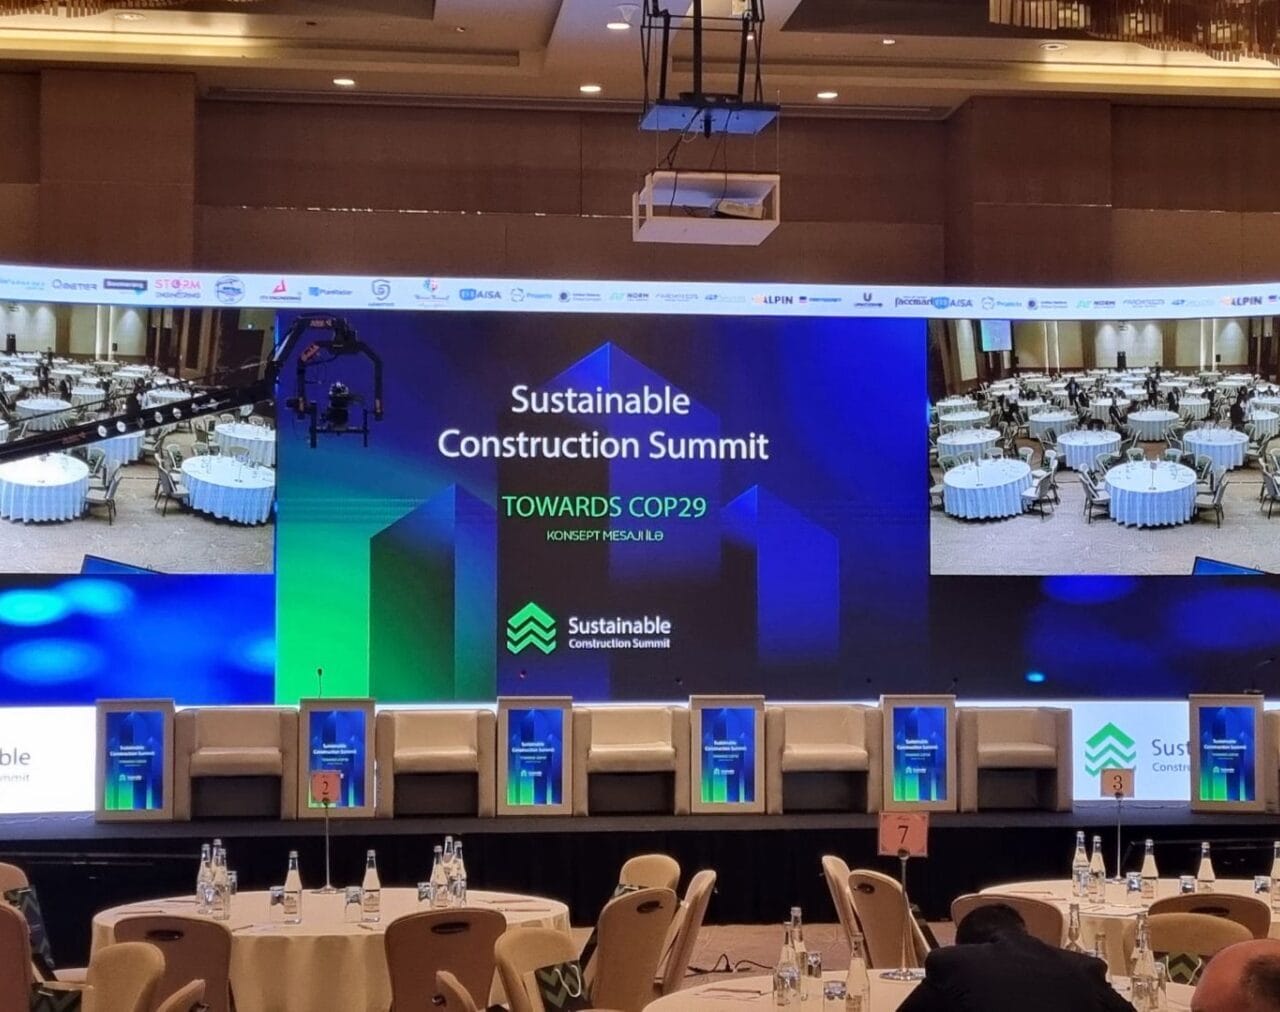 We participated in the “Sustainable Construction Summit” held in Azerbaijan